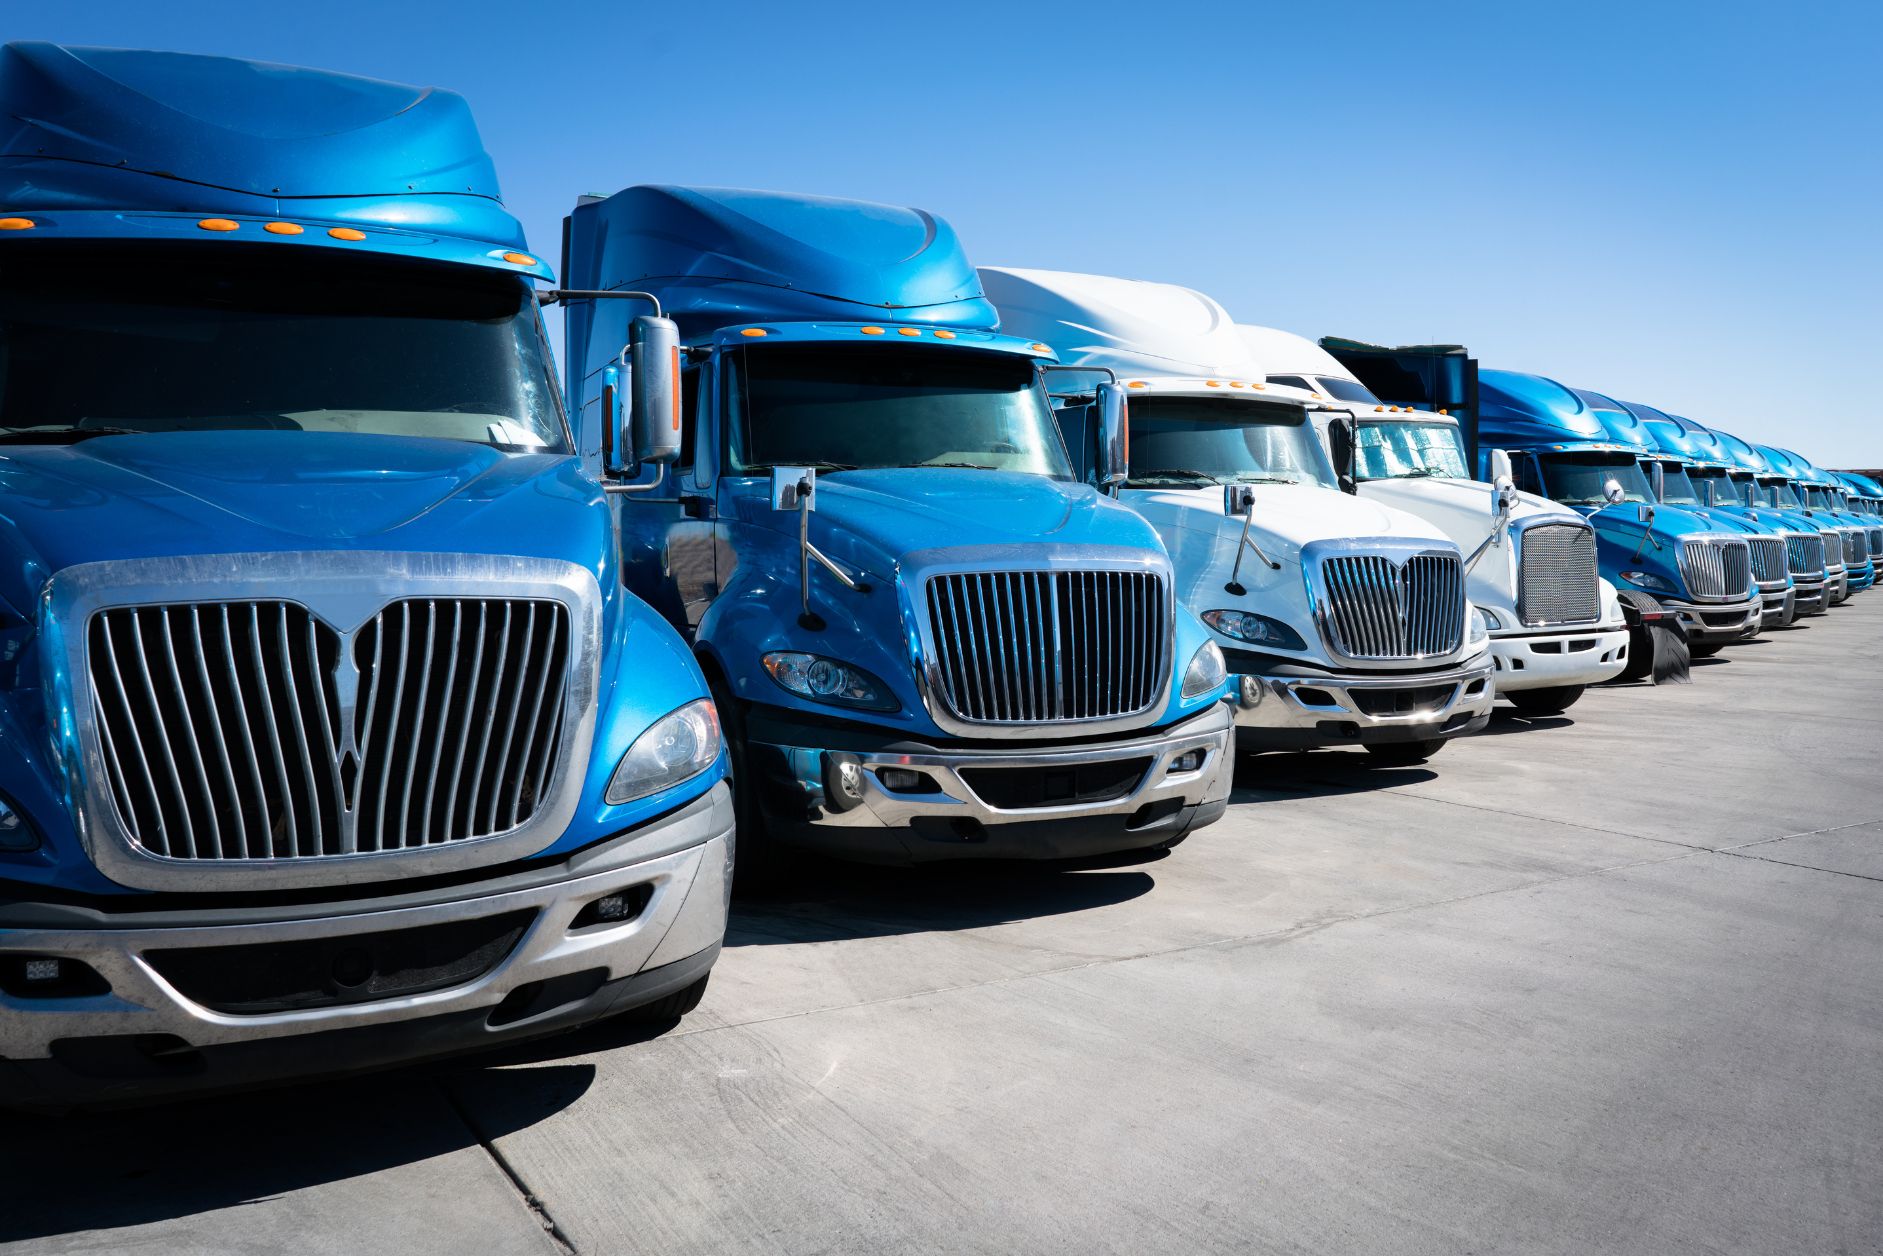 A fleet of commercial trucks lined up, representing the diverse transportation needs in the trucking industry. This image is featured in our trucking insurance blog post, illustrating the importance of comprehensive coverage for trucking businesses.